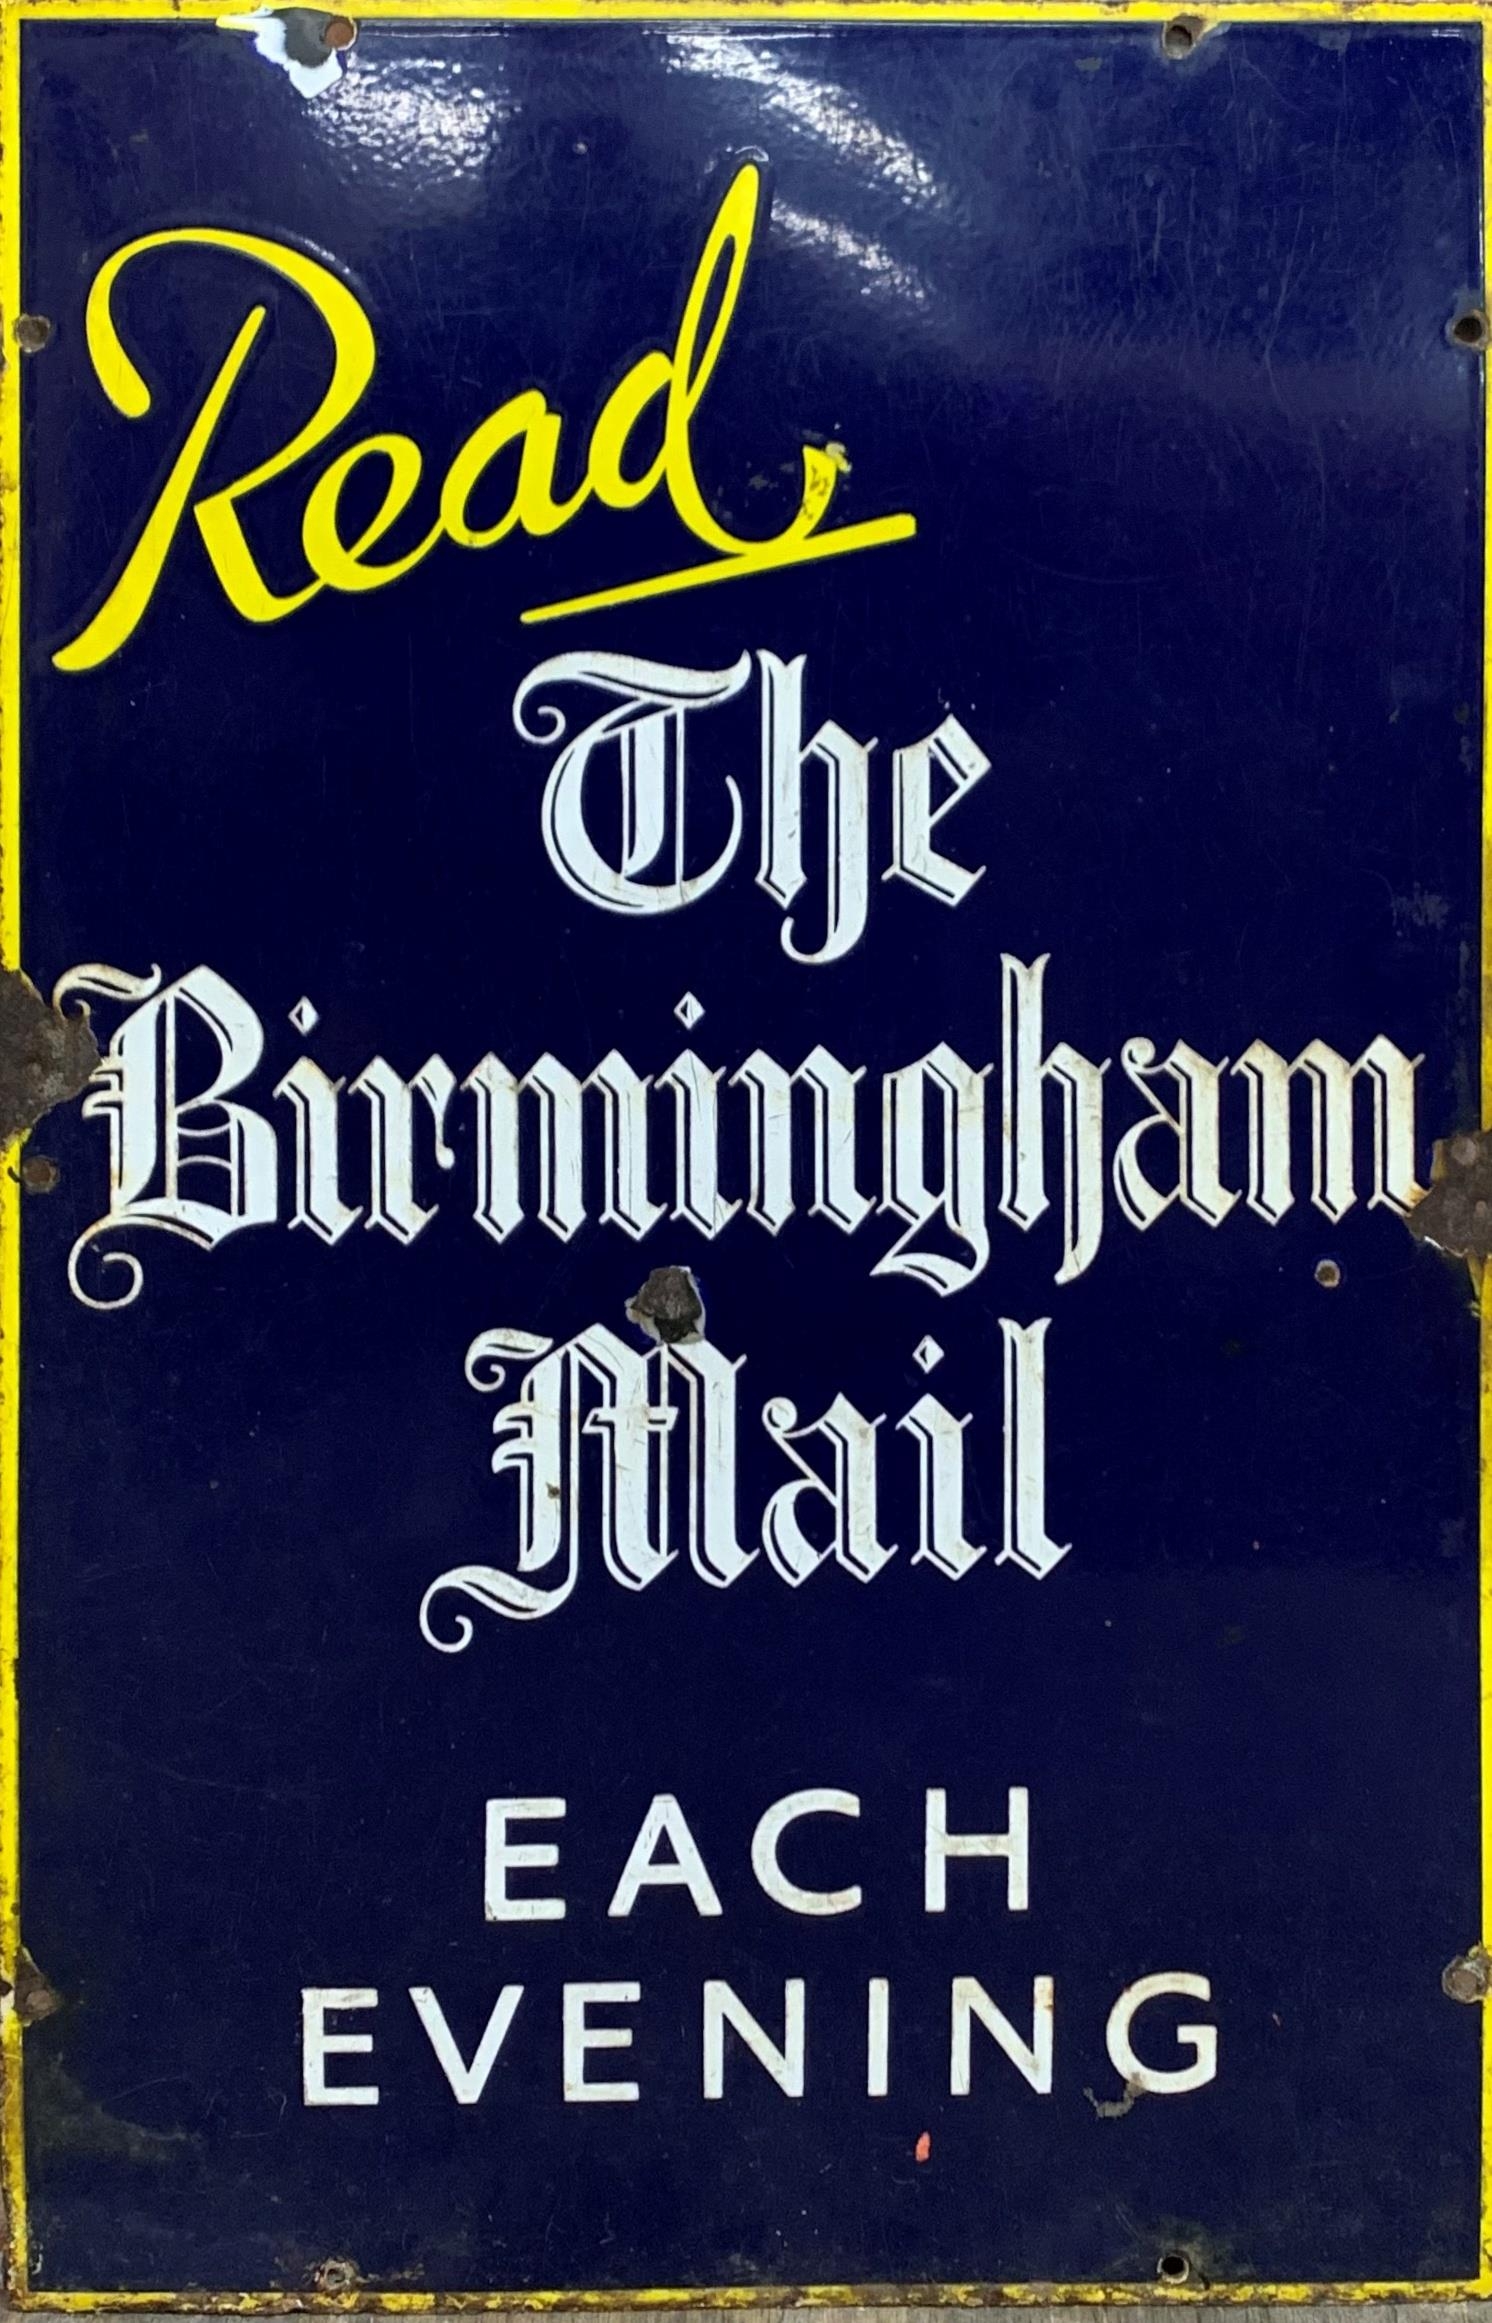 "Read The Birmingham Mail Each Evening" blue and yellow enamel sign, 72cm x 45cm